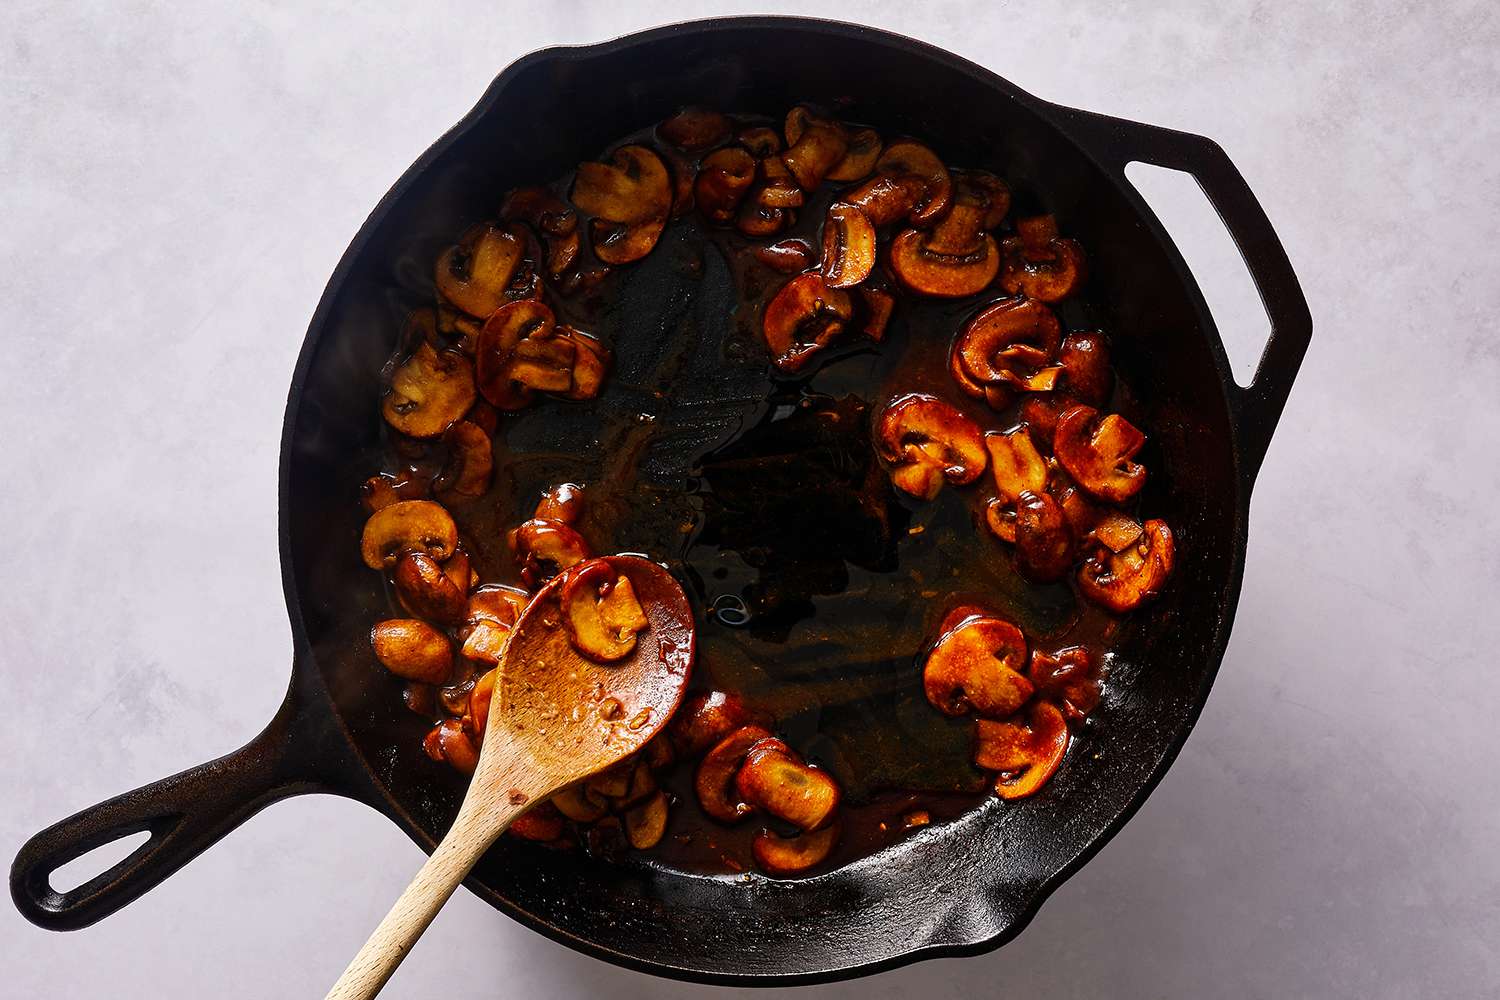 Mushrooms and sauce cooking in a cast iron skillet, with a wooden spoon 